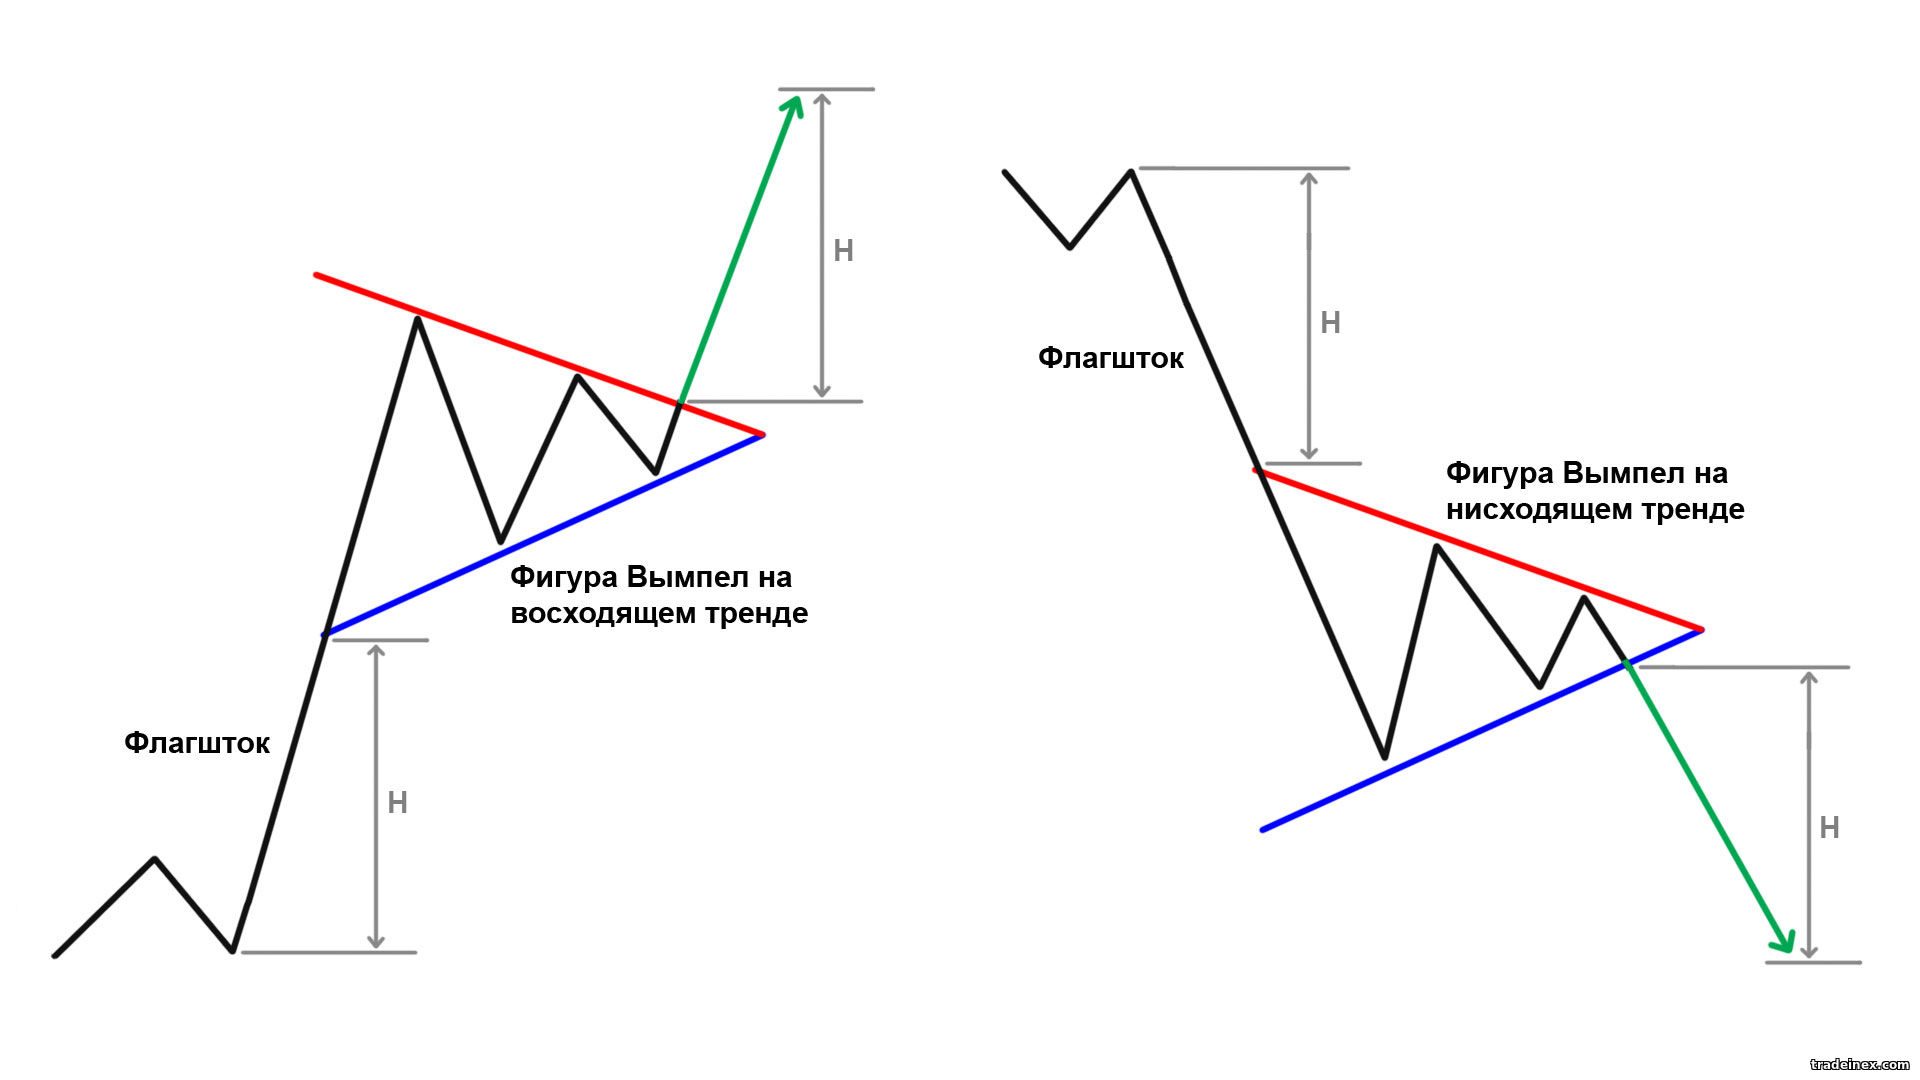 Pennant figure in trading: how it looks on the chart, trading strategies